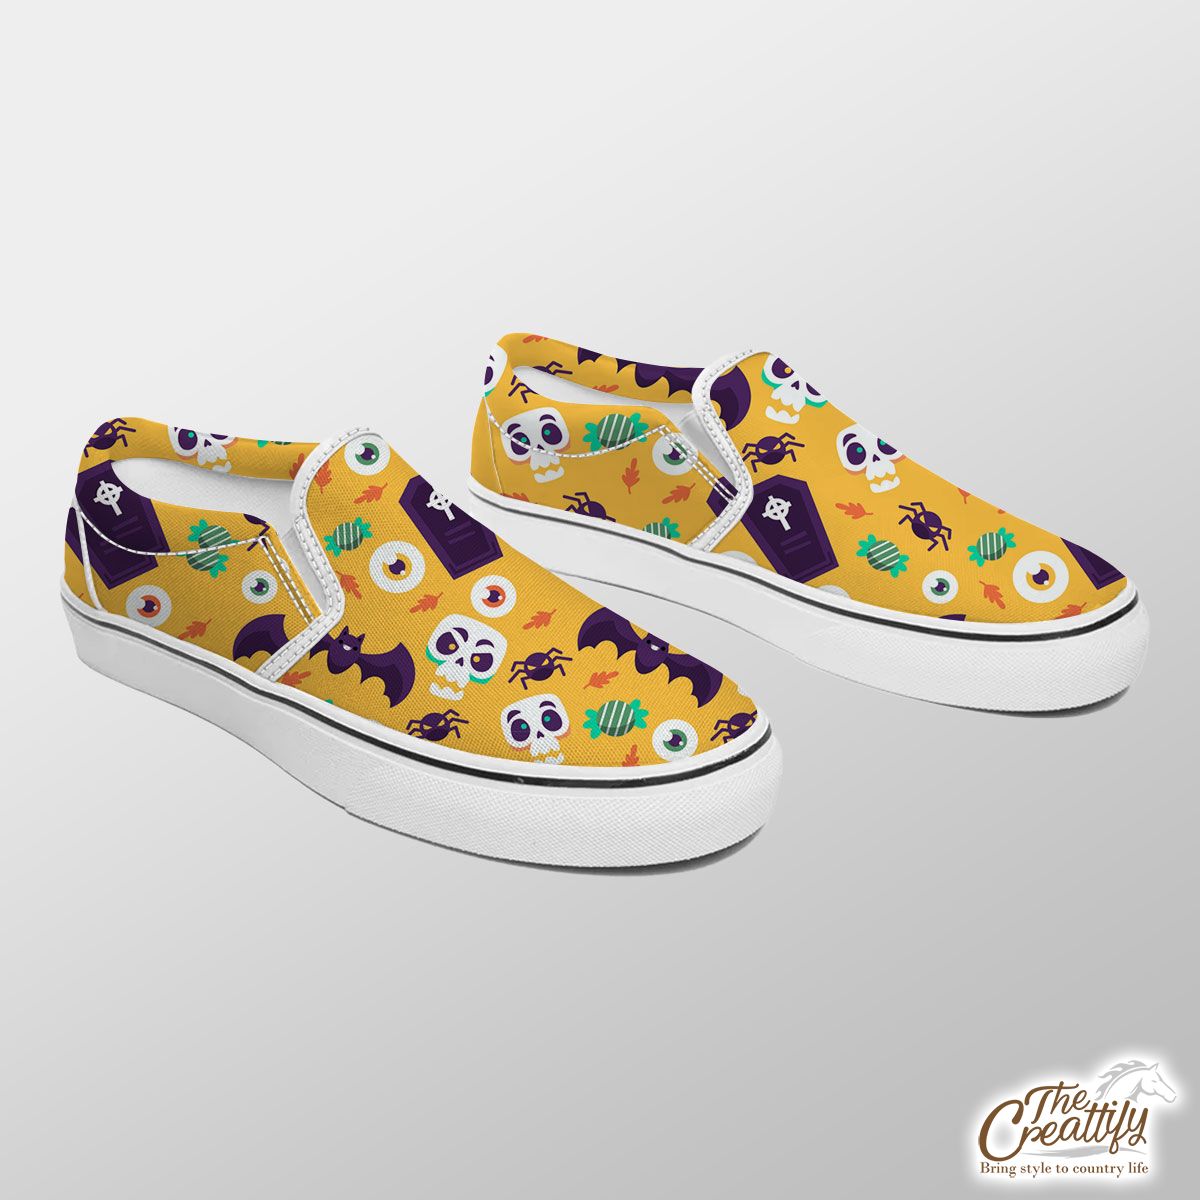 Cute Halloween Bats, Candy, Spider 1 Slip On Sneakers